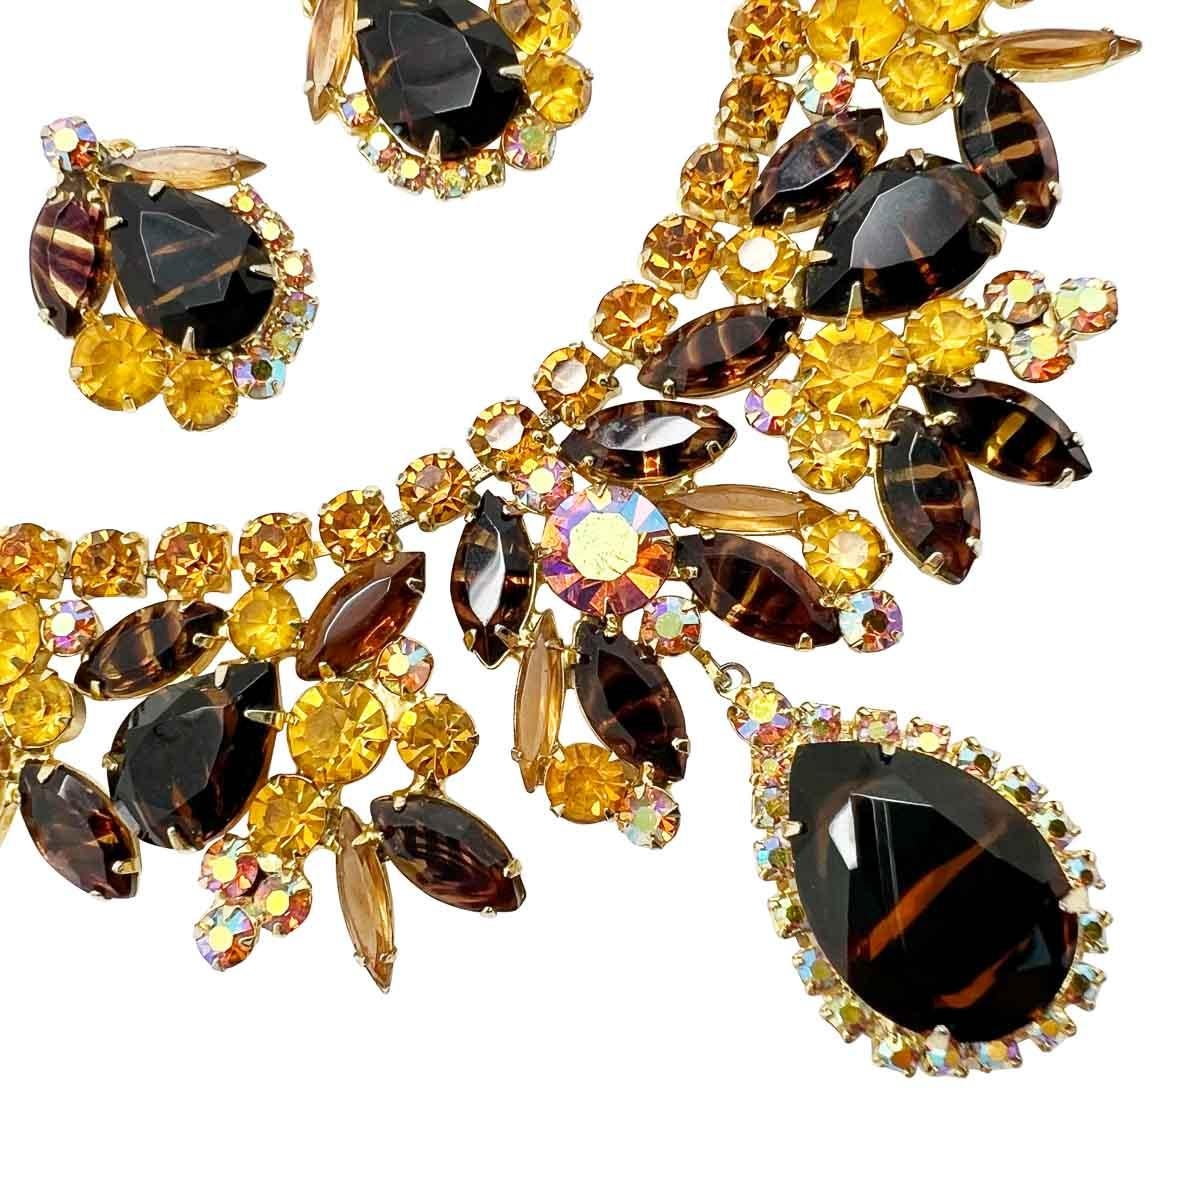 A mesmerizingly beautiful vintage Juliana Zebra Necklace created by American jewellers DeLizza & Elster during the 1950s. A wonderfully autumnal colour palette of fancy cut rhinestones adorn a statement collar from end to end and culminate in a deep